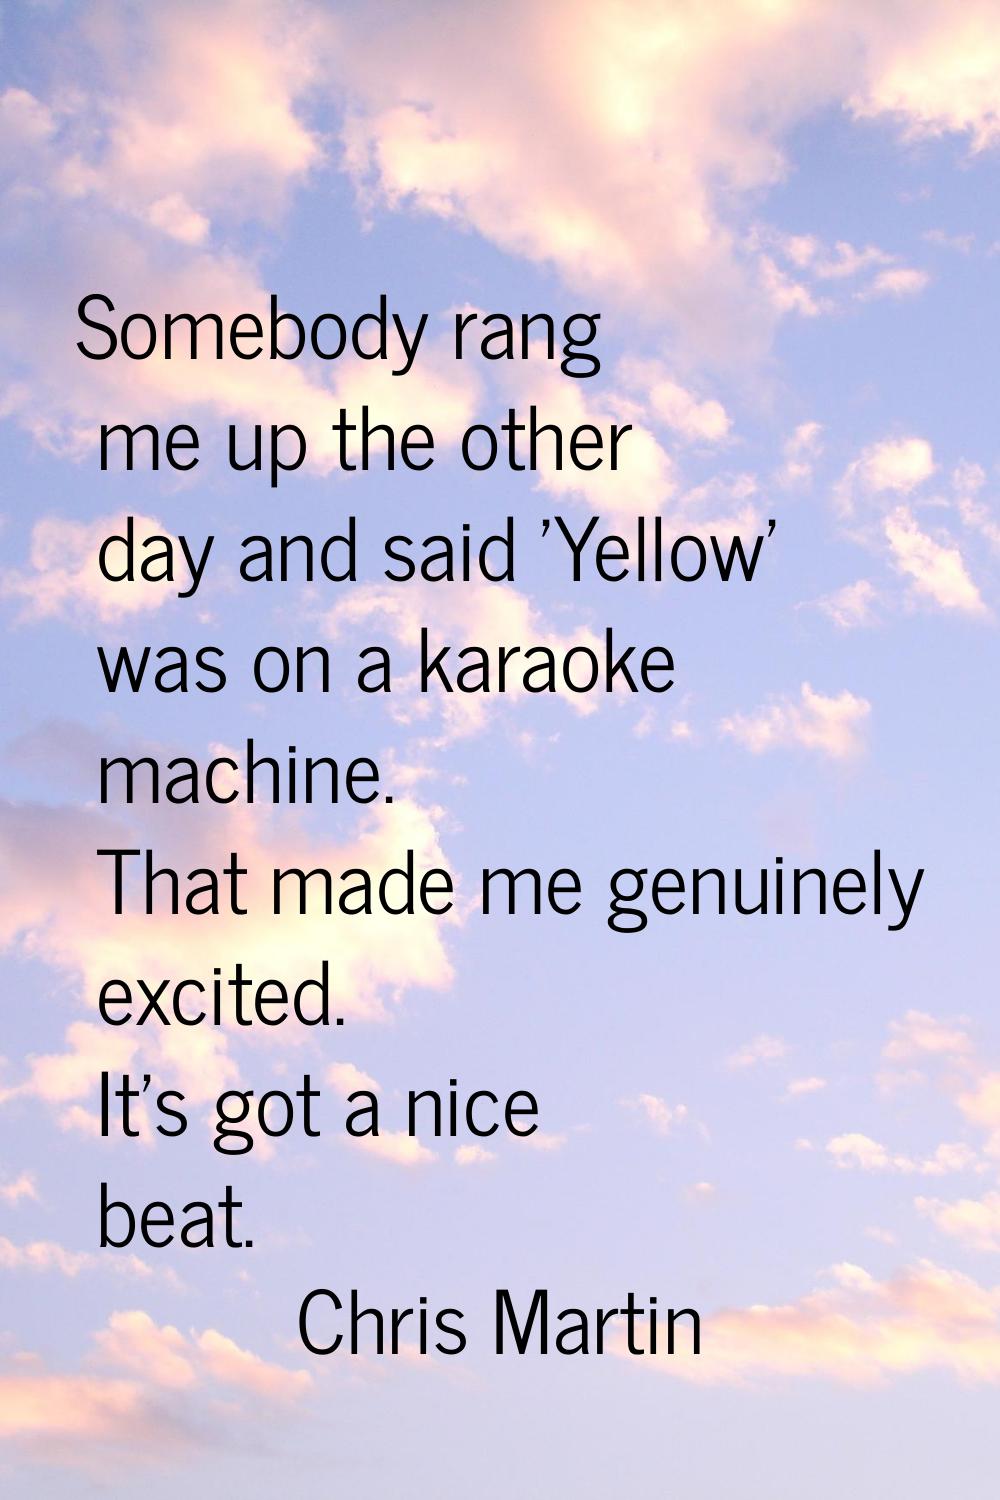 Somebody rang me up the other day and said 'Yellow' was on a karaoke machine. That made me genuinel